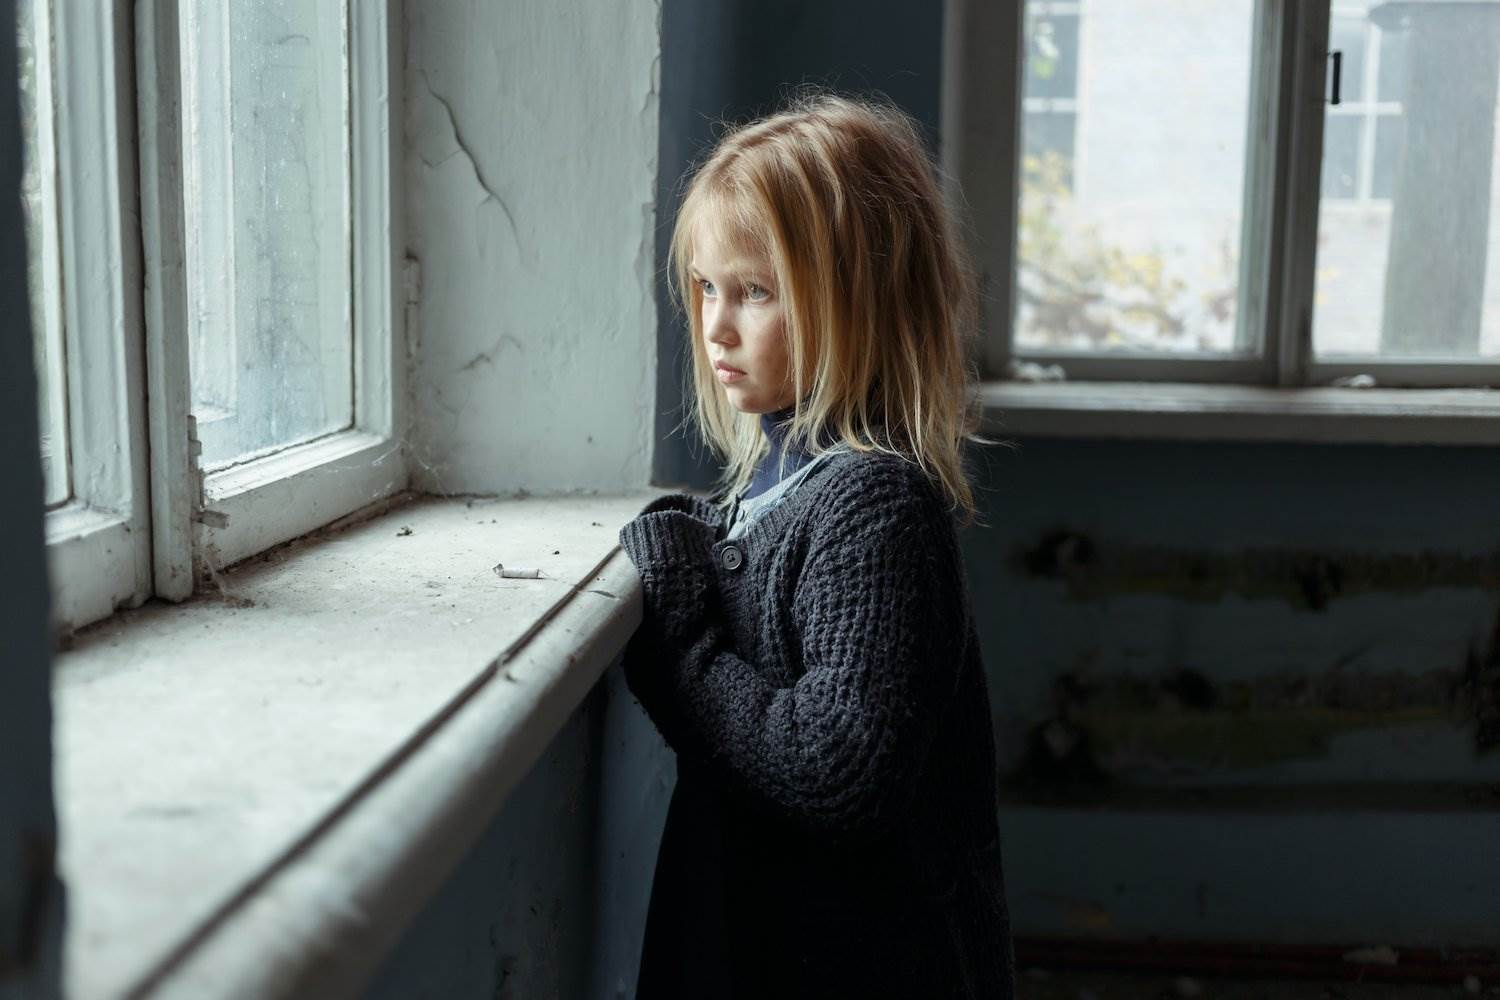 Child looking forlorn out of window